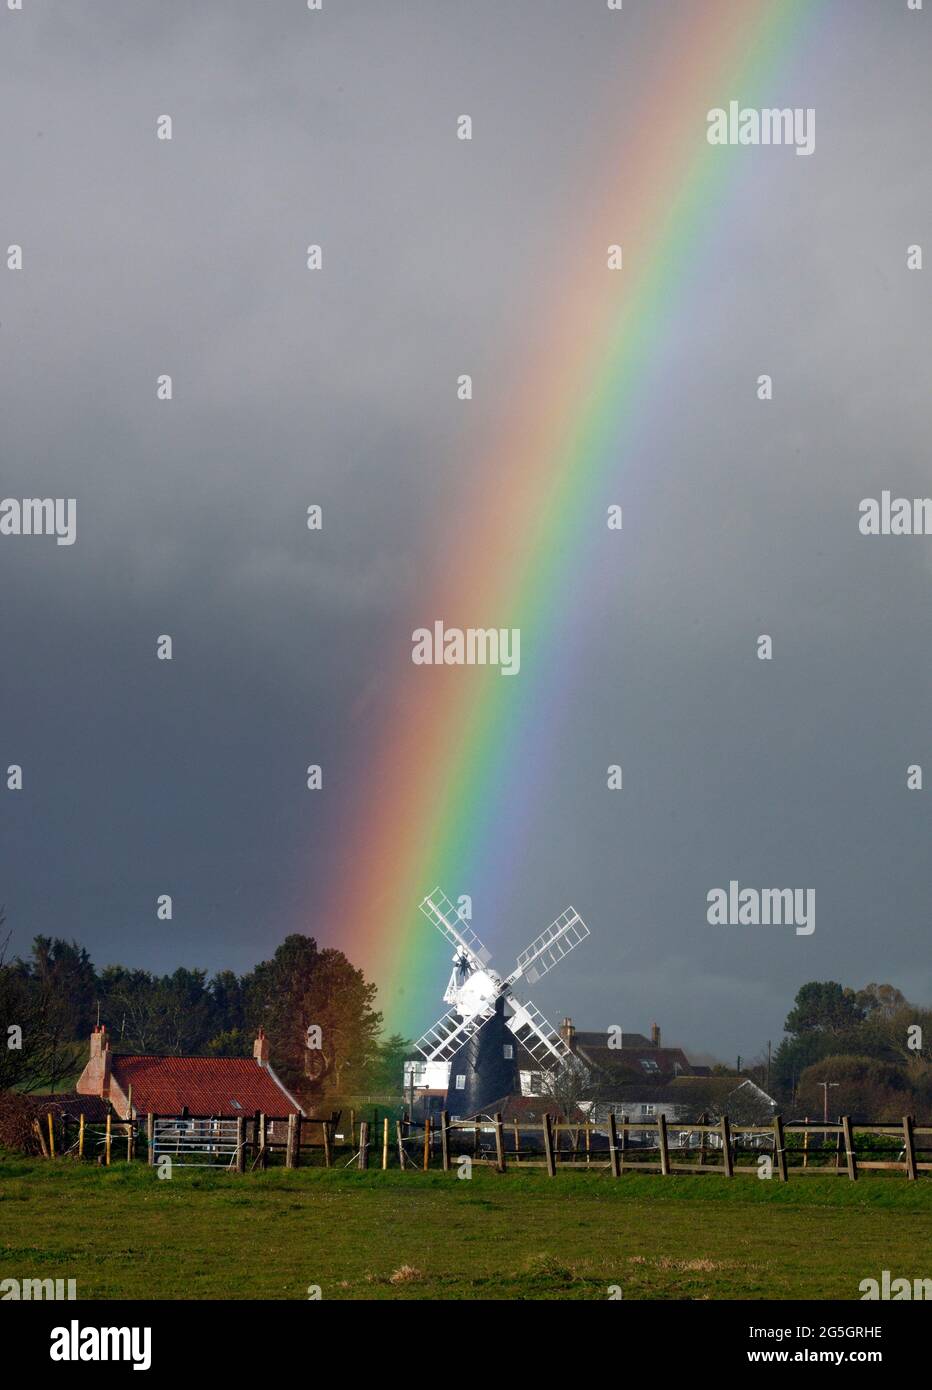 Stow Windmill near Mundesley on the North Norfolk coast, England. The windmill was converted to holiday accomodation in 2014. image taken April 2021 Stock Photo